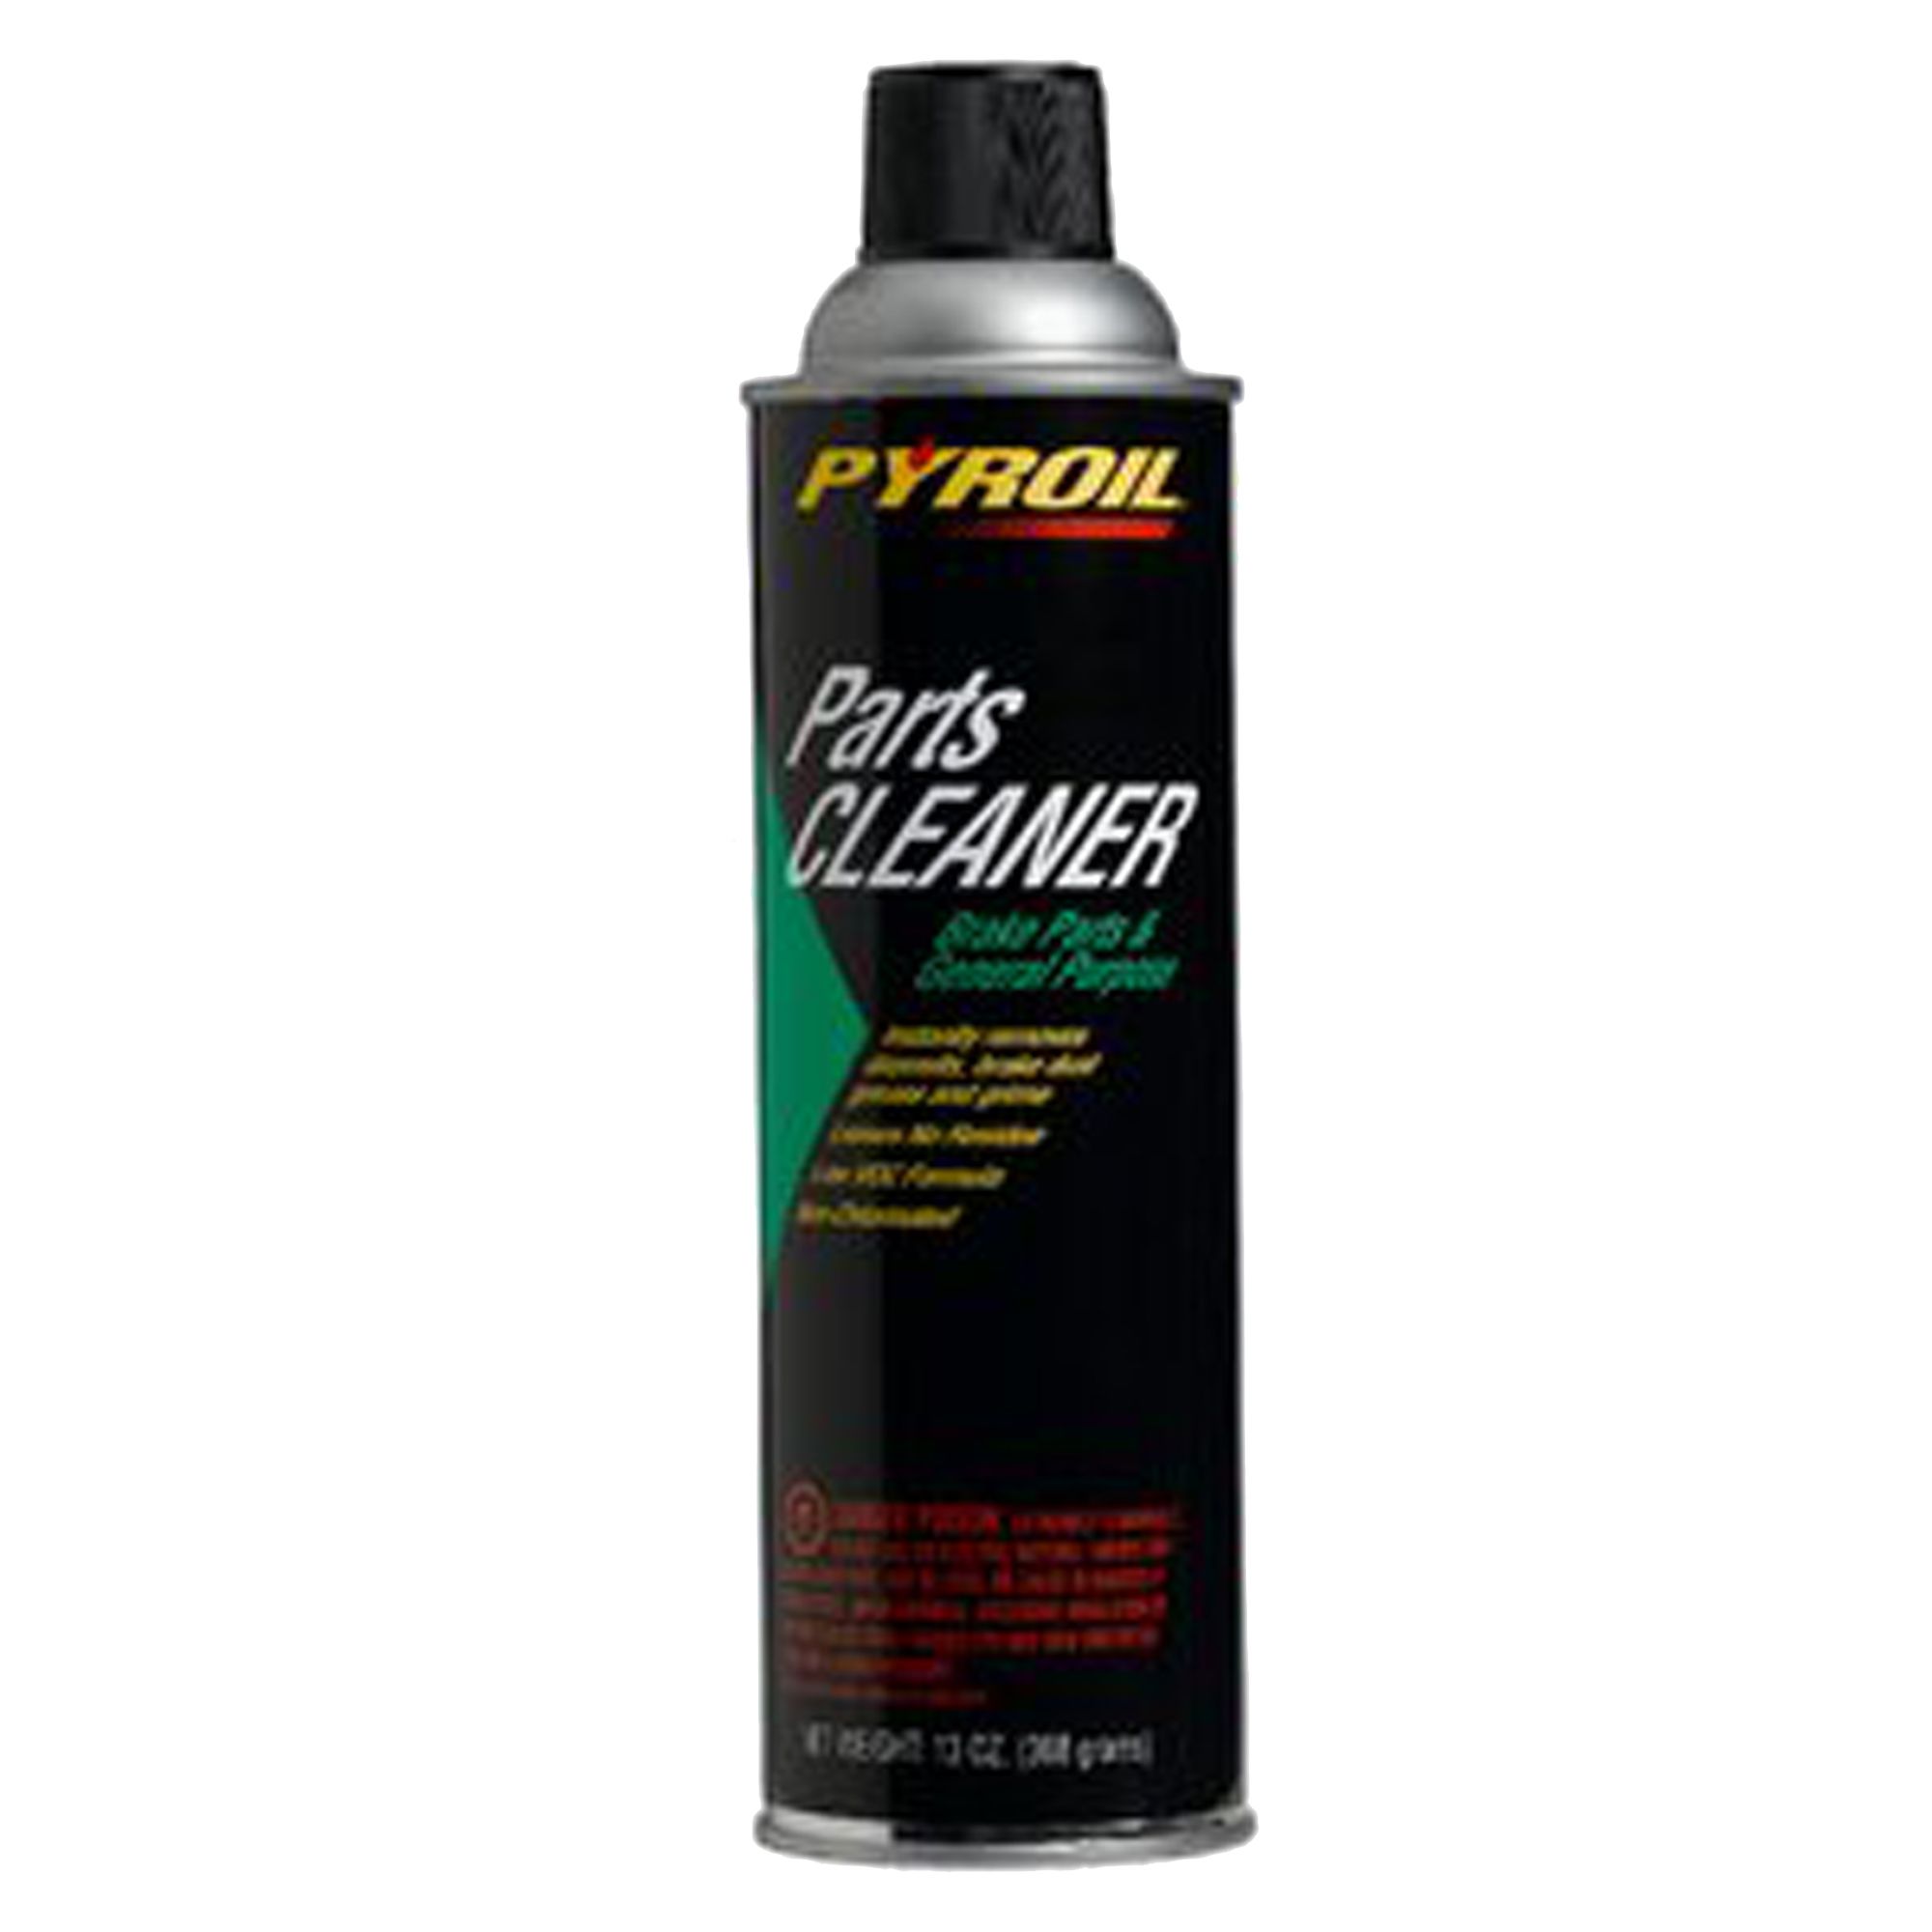 Pyroil Parts Cleaner